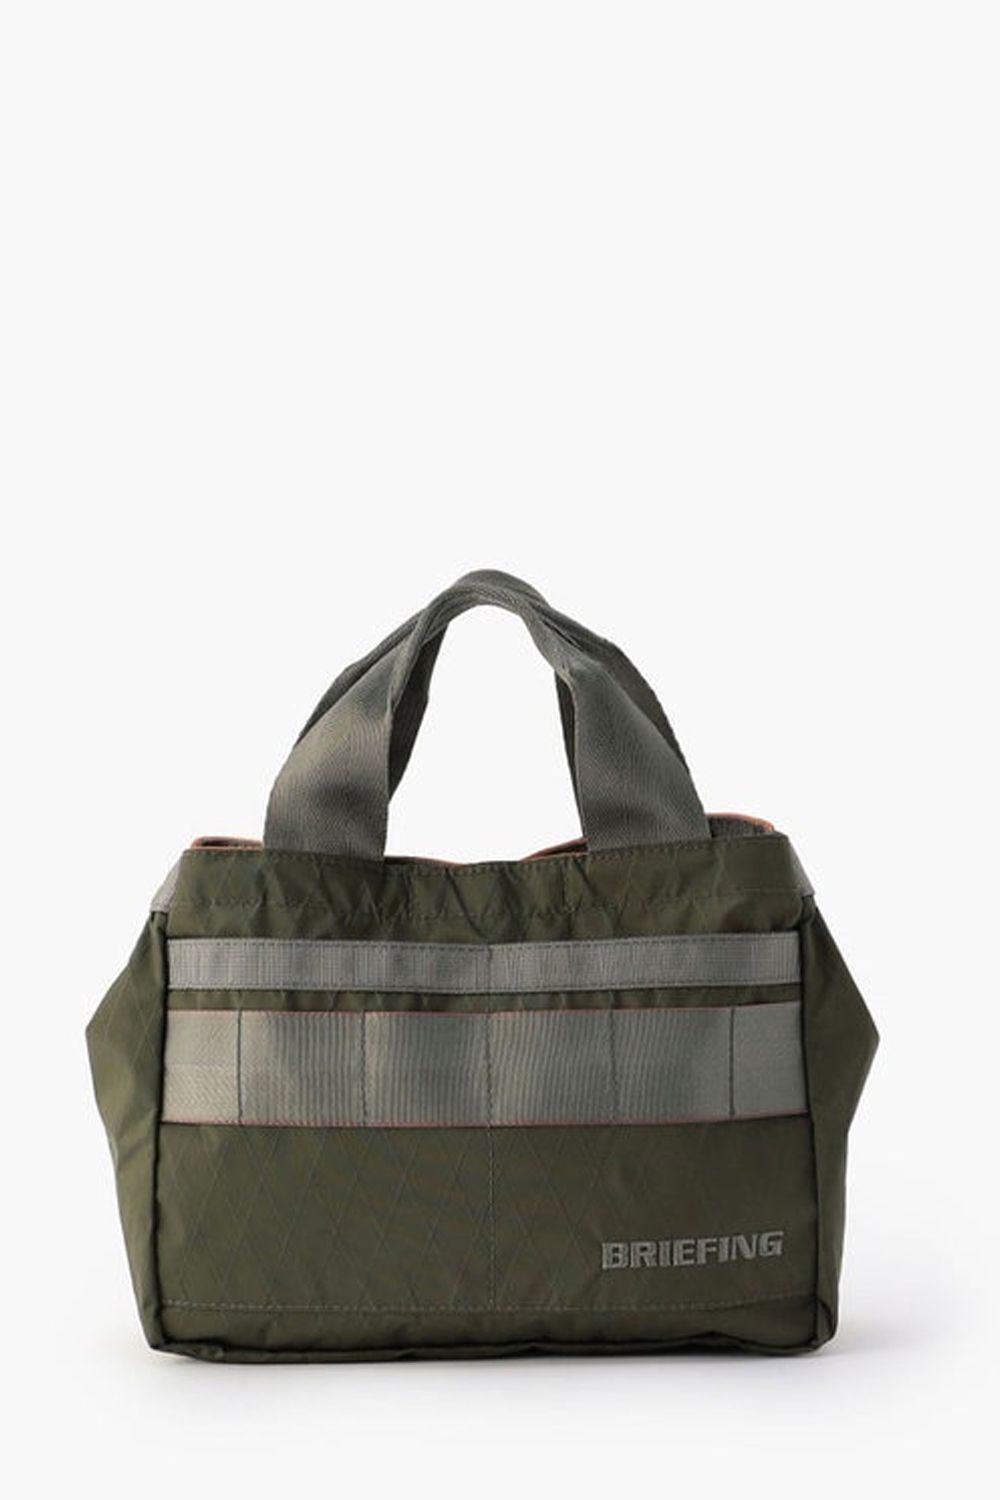 BRIEFING - 【MIL COLLECTION】 CART TOTE XP WOLF GRAY / ダイヤ 